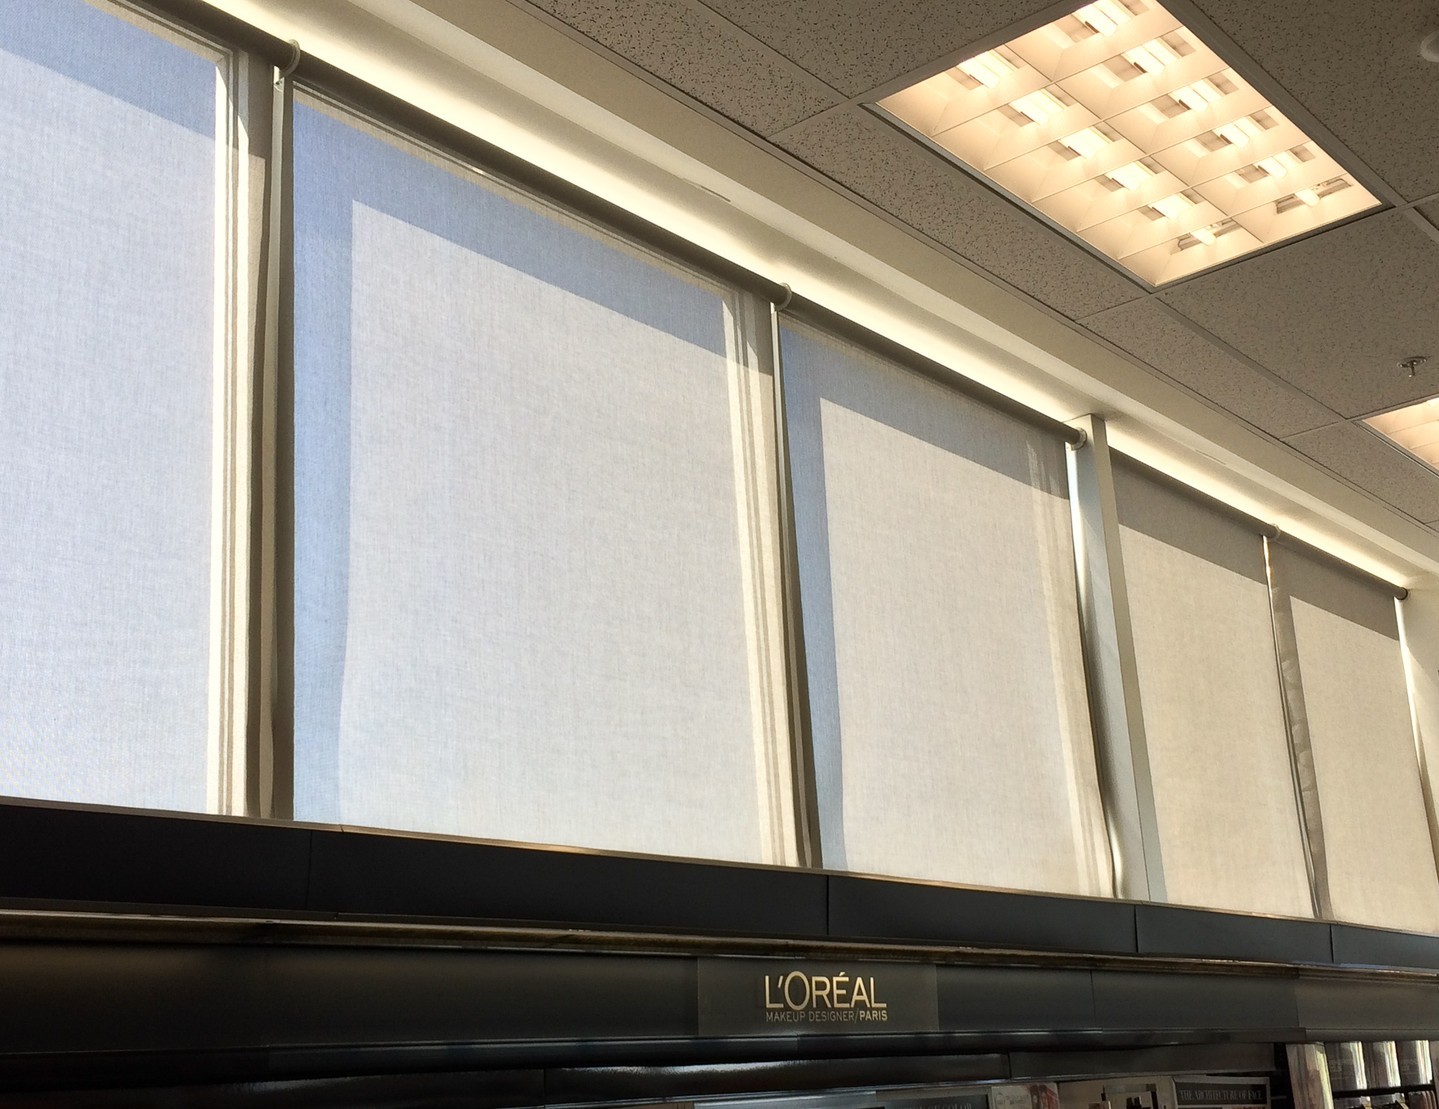 Happy first day of Spring, everyone! We are very excited about the sun staying out a little longer. But more sun can mean more glare and heat gain. Automated shades with the appropriate shade fabric can enhance your customer's experience, without creating more work for your staff. Our autonomous Eclipse sun-sensor makes automation simple and cost effective. Your shades can move with the sun so everyone can enjoy these longer days! 😎 
#RollAShade #Shades #outdoordining #food  #riverside #california #socal #usa #outdoordining #dining #datenight #familydinner #patio #patiodining #patiofurniture #cocktails #lunch #windowshades #socialdistancing #bbq #brunch #nyc  #lunchspots #dinnerspots #cvs